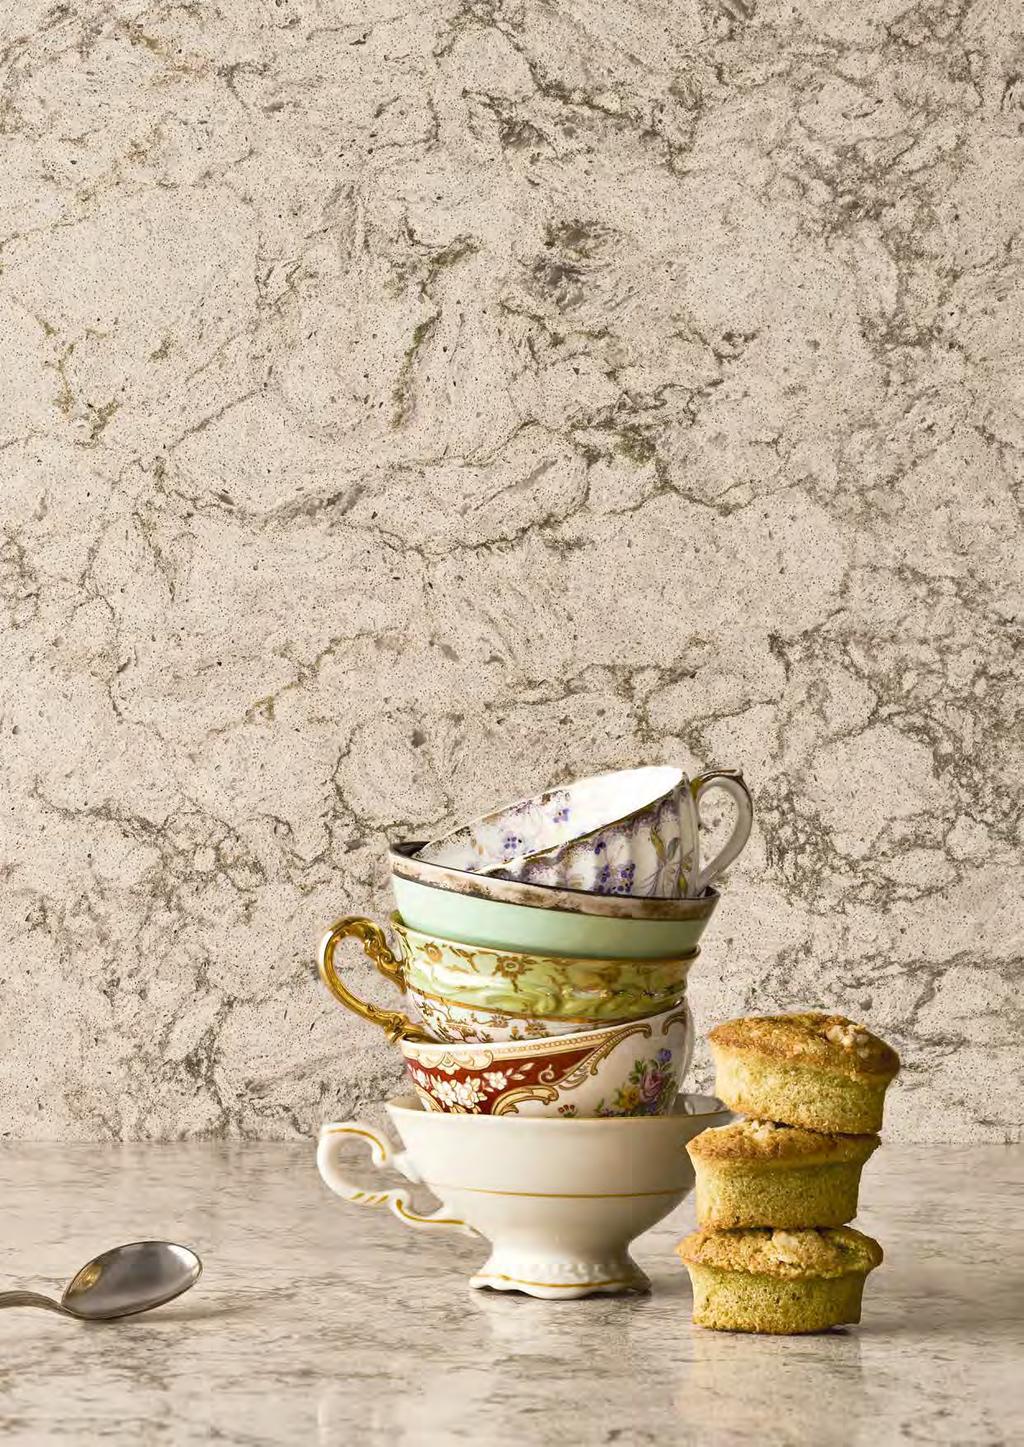 Inspired by the Delicate Beauty of Nature The Granite Inspired Series The Caesarstone granite inspired collection achieves the exquisite appearance of natural stone and carries forward a symphony of